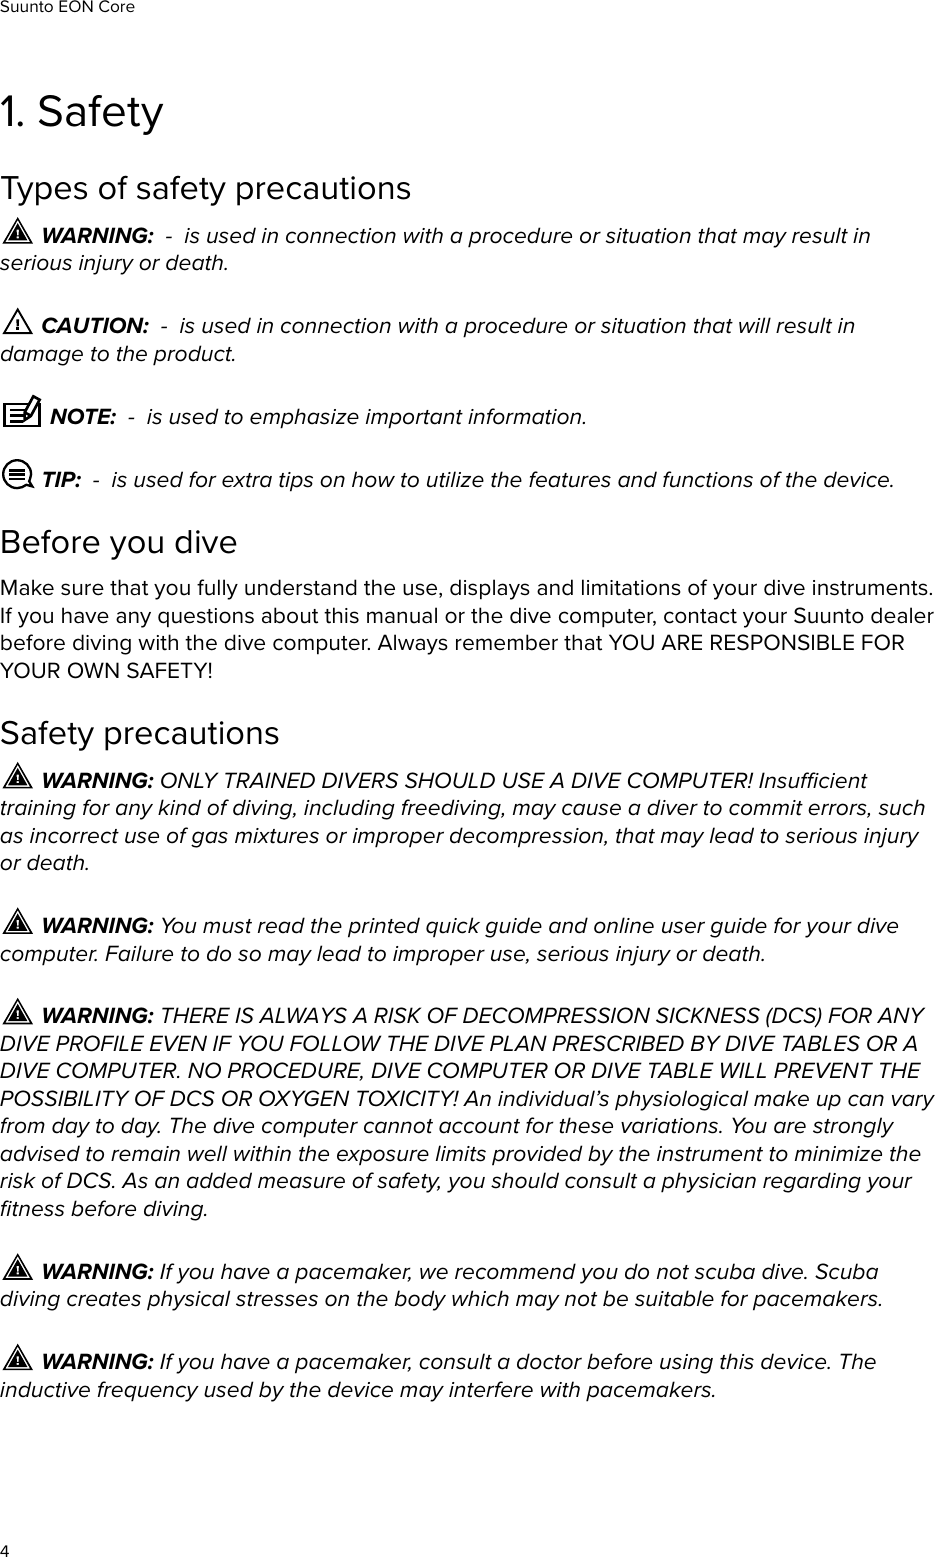 1. SafetyTypes of safety precautions WARNING:  -  is used in connection with a procedure or situation that may result inserious injury or death. CAUTION:  -  is used in connection with a procedure or situation that will result indamage to the product. NOTE:  -  is used to emphasize important information. TIP:  -  is used for extra tips on how to utilize the features and functions of the device.Before you diveMake sure that you fully understand the use, displays and limitations of your dive instruments.If you have any questions about this manual or the dive computer, contact your Suunto dealerbefore diving with the dive computer. Always remember that YOU ARE RESPONSIBLE FORYOUR OWN SAFETY!Safety precautions WARNING: ONLY TRAINED DIVERS SHOULD USE A DIVE COMPUTER! Insucienttraining for any kind of diving, including freediving, may cause a diver to commit errors, suchas incorrect use of gas mixtures or improper decompression, that may lead to serious injuryor death. WARNING: You must read the printed quick guide and online user guide for your divecomputer. Failure to do so may lead to improper use, serious injury or death. WARNING: THERE IS ALWAYS A RISK OF DECOMPRESSION SICKNESS (DCS) FOR ANYDIVE PROFILE EVEN IF YOU FOLLOW THE DIVE PLAN PRESCRIBED BY DIVE TABLES OR ADIVE COMPUTER. NO PROCEDURE, DIVE COMPUTER OR DIVE TABLE WILL PREVENT THEPOSSIBILITY OF DCS OR OXYGEN TOXICITY! An individual’s physiological make up can varyfrom day to day. The dive computer cannot account for these variations. You are stronglyadvised to remain well within the exposure limits provided by the instrument to minimize therisk of DCS. As an added measure of safety, you should consult a physician regarding yourﬁtness before diving. WARNING: If you have a pacemaker, we recommend you do not scuba dive. Scubadiving creates physical stresses on the body which may not be suitable for pacemakers. WARNING: If you have a pacemaker, consult a doctor before using this device. Theinductive frequency used by the device may interfere with pacemakers.Suunto EON Core4